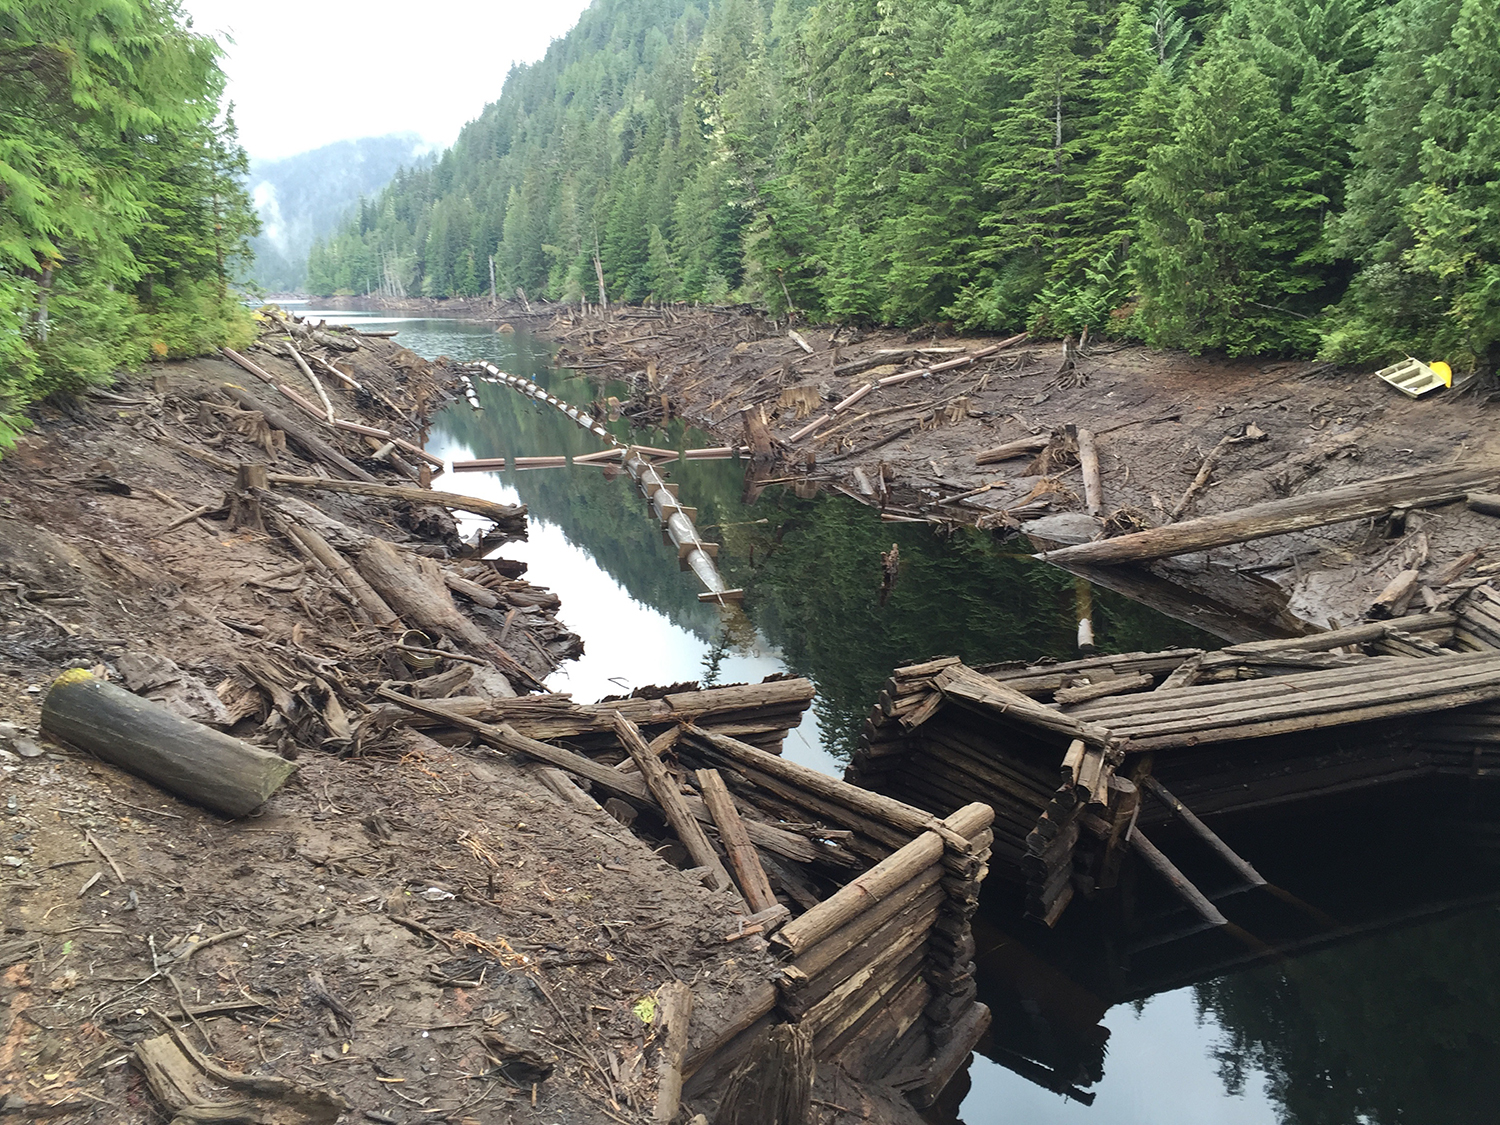 Photo by Jeremy Bynum
Low water exposes the banks of a reservoir near Ketchikan during the drought.